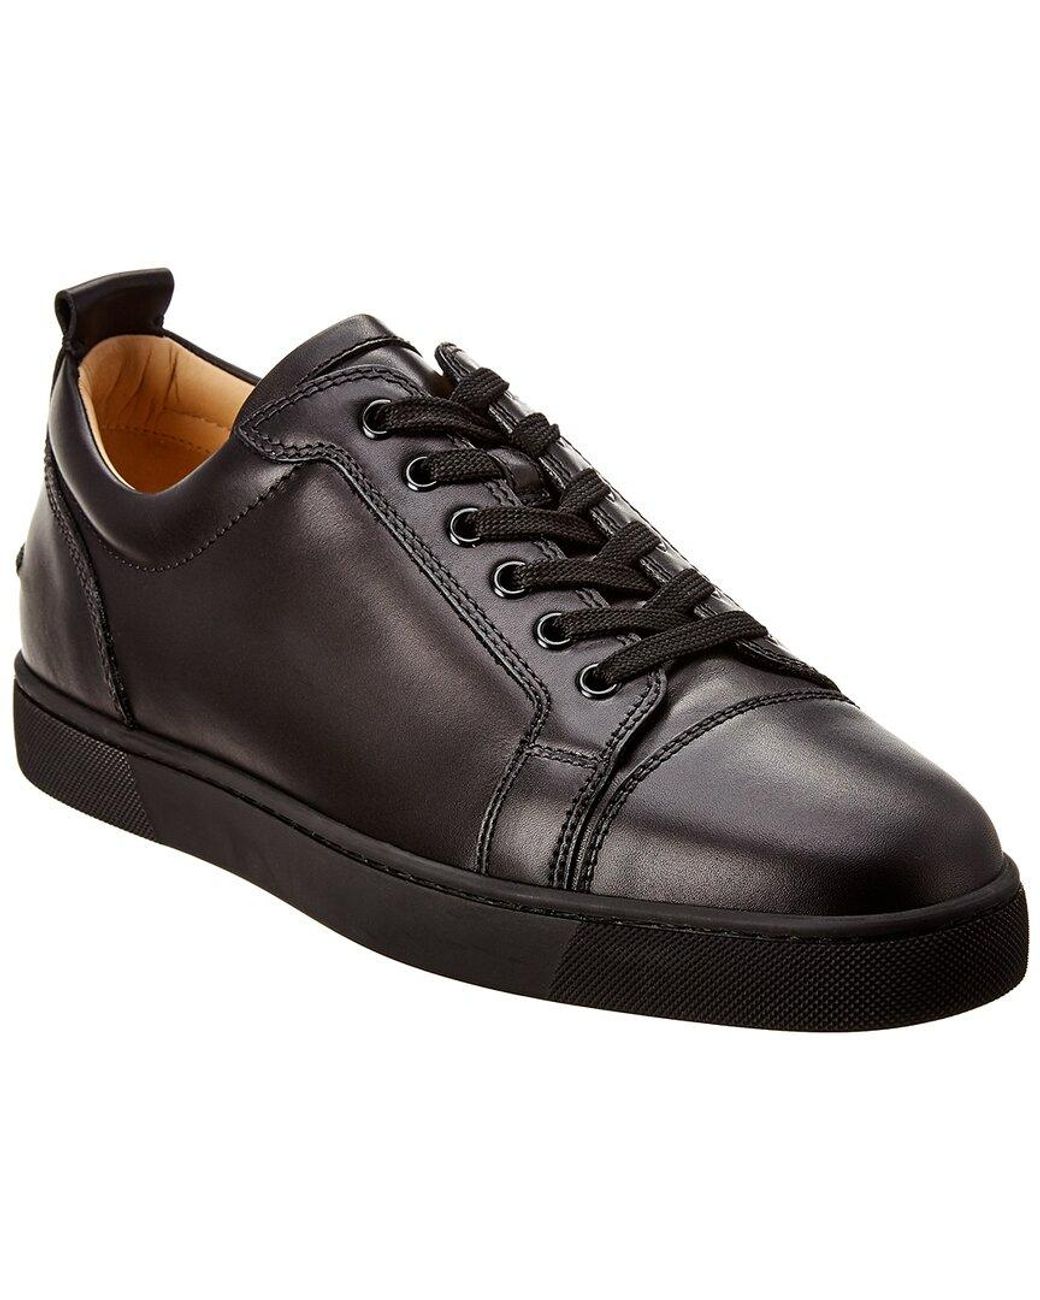 Louis Junior Studded Leather Sneakers in Black - Christian Louboutin